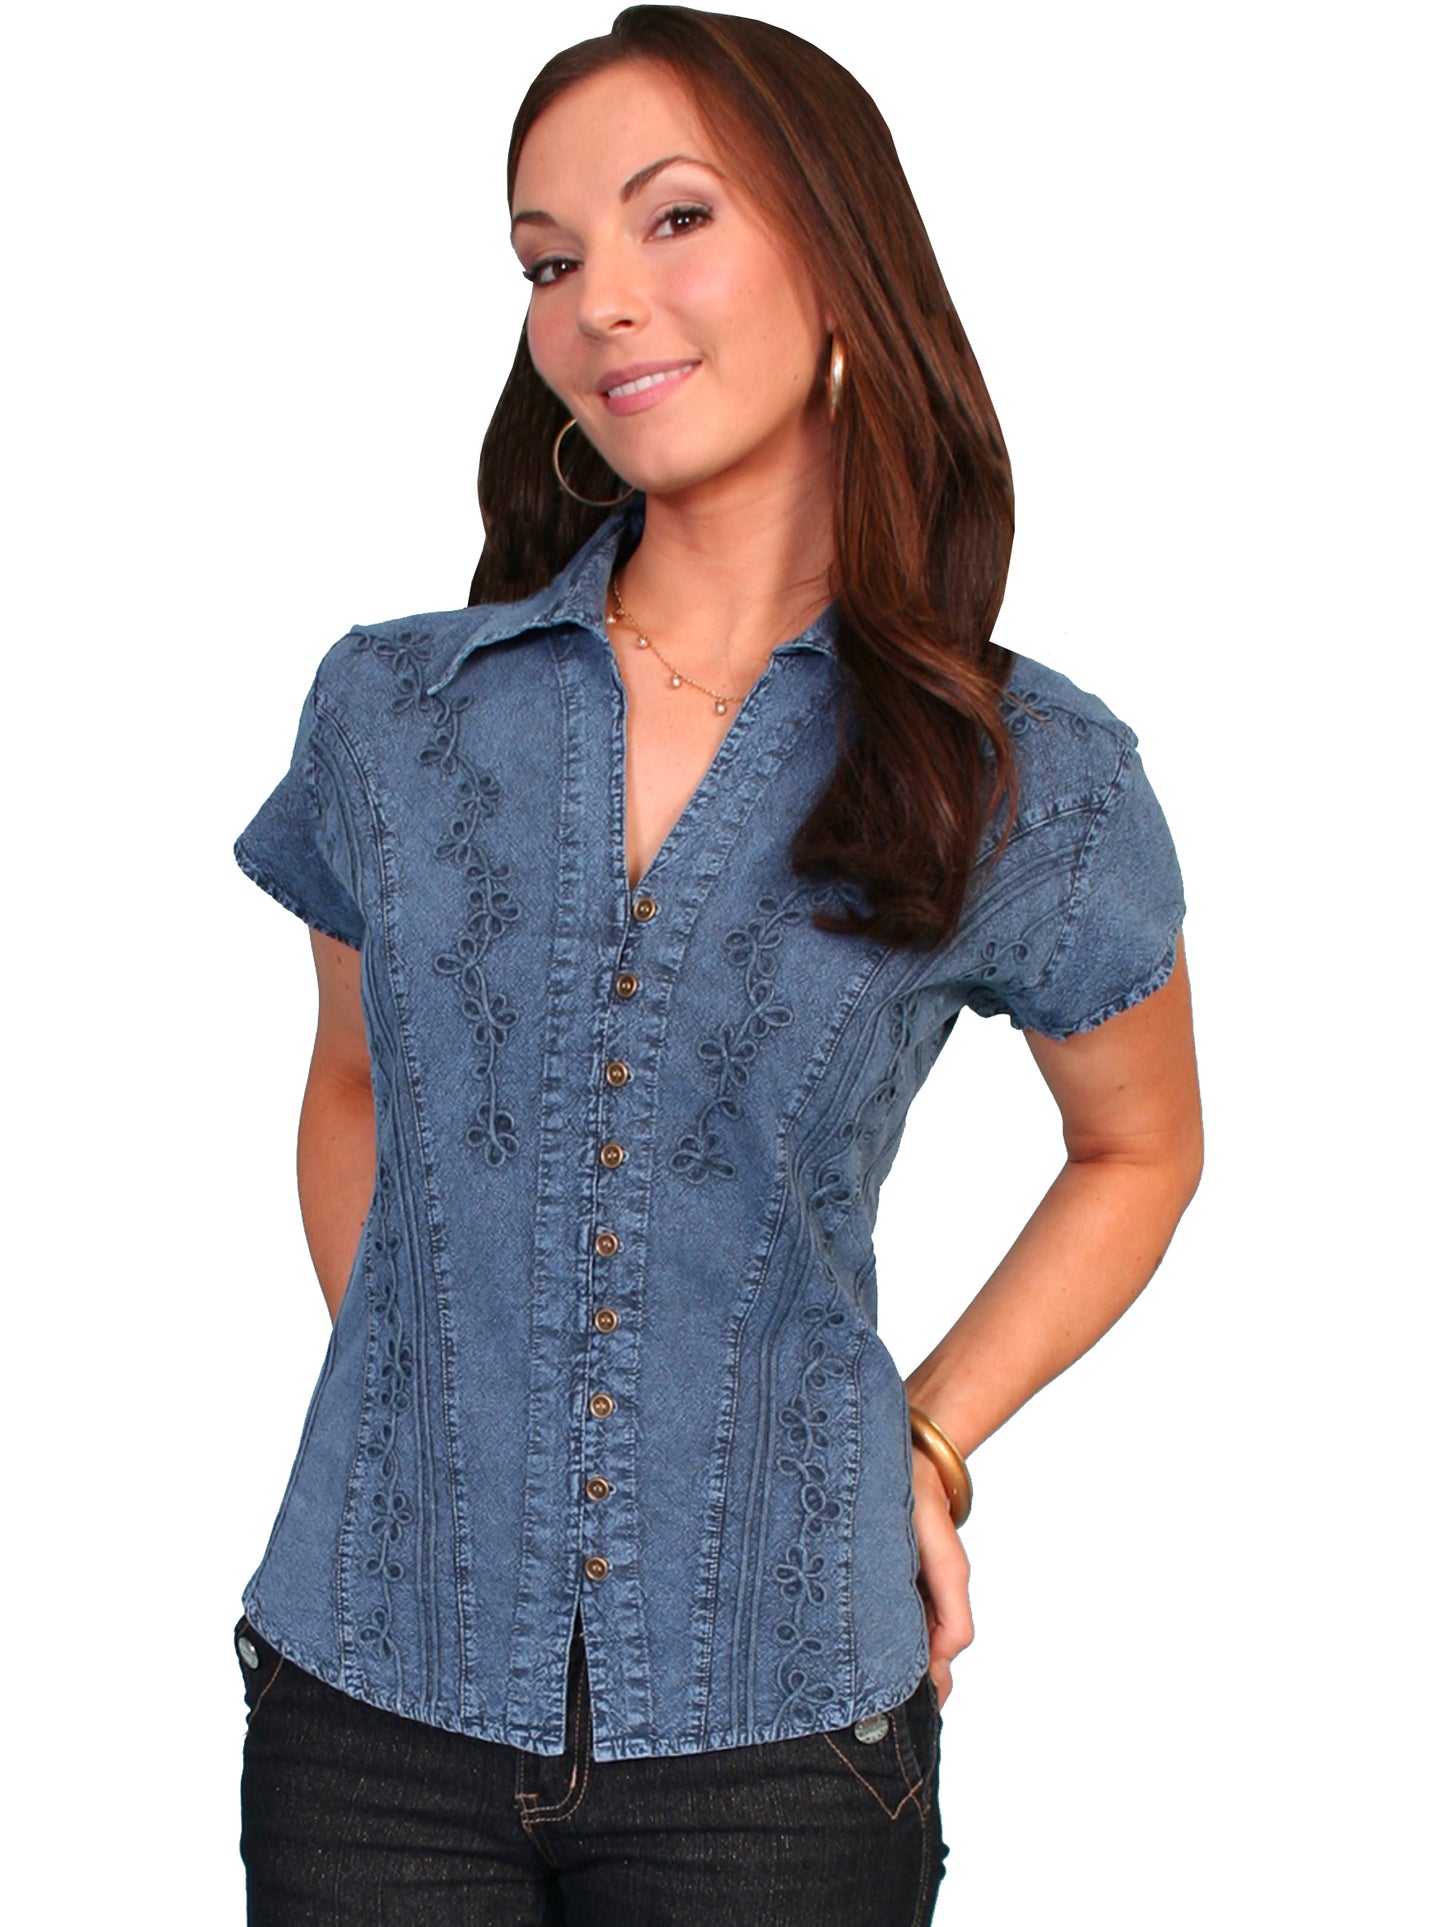 Blue Peruvian Cotton Cap Sleeve Blouse by Scully Bourbon Cowgirl